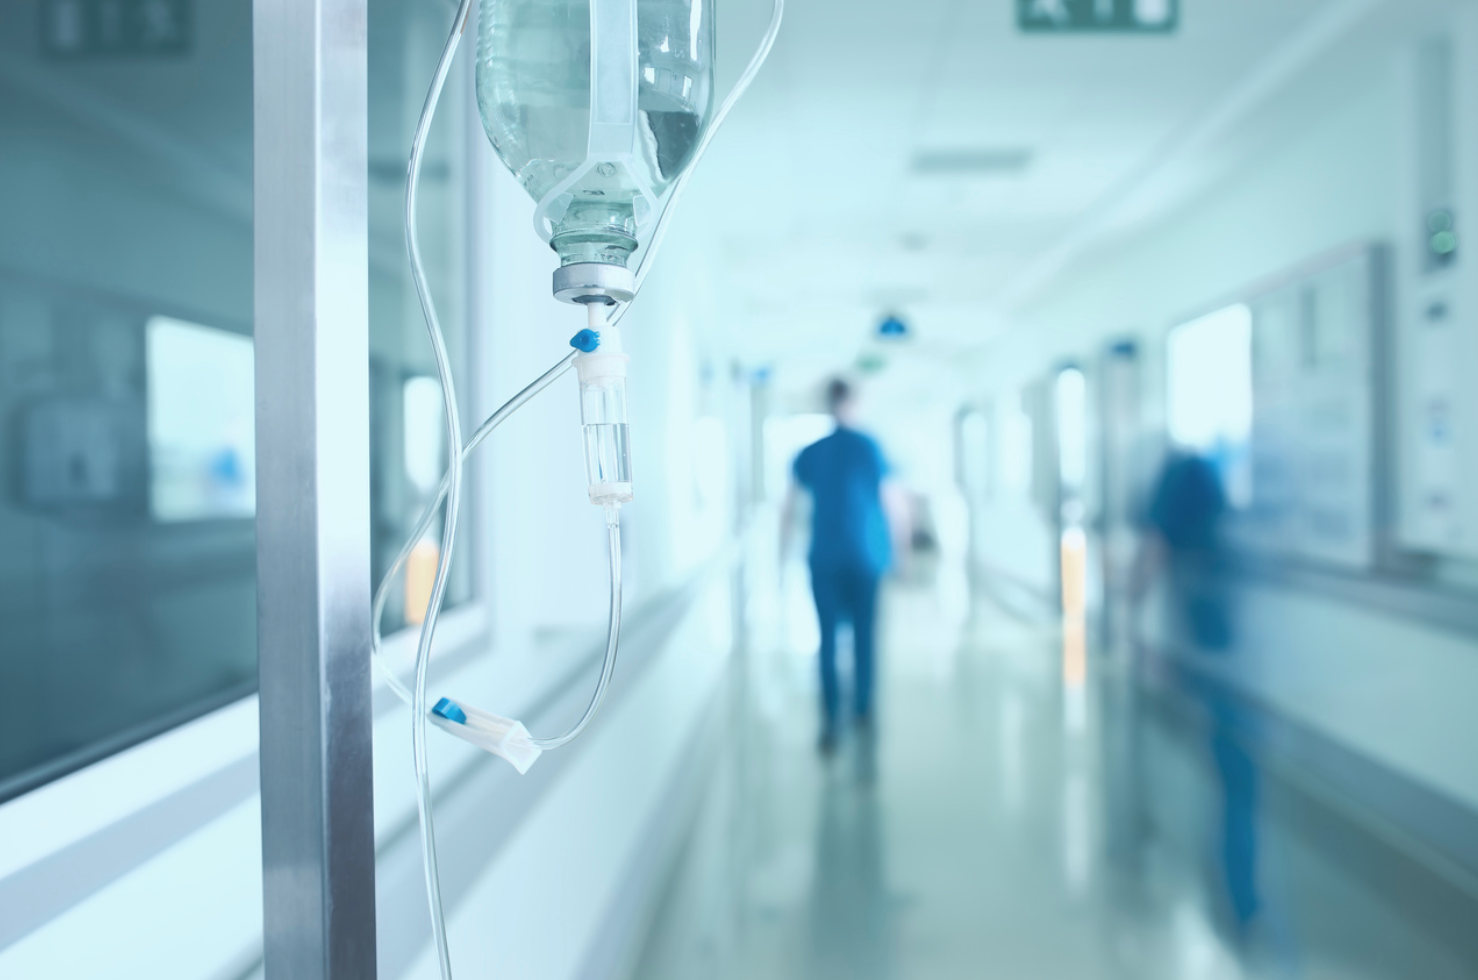 Hospital Environmental Improvements May Lower Rate of C Difficile Infections